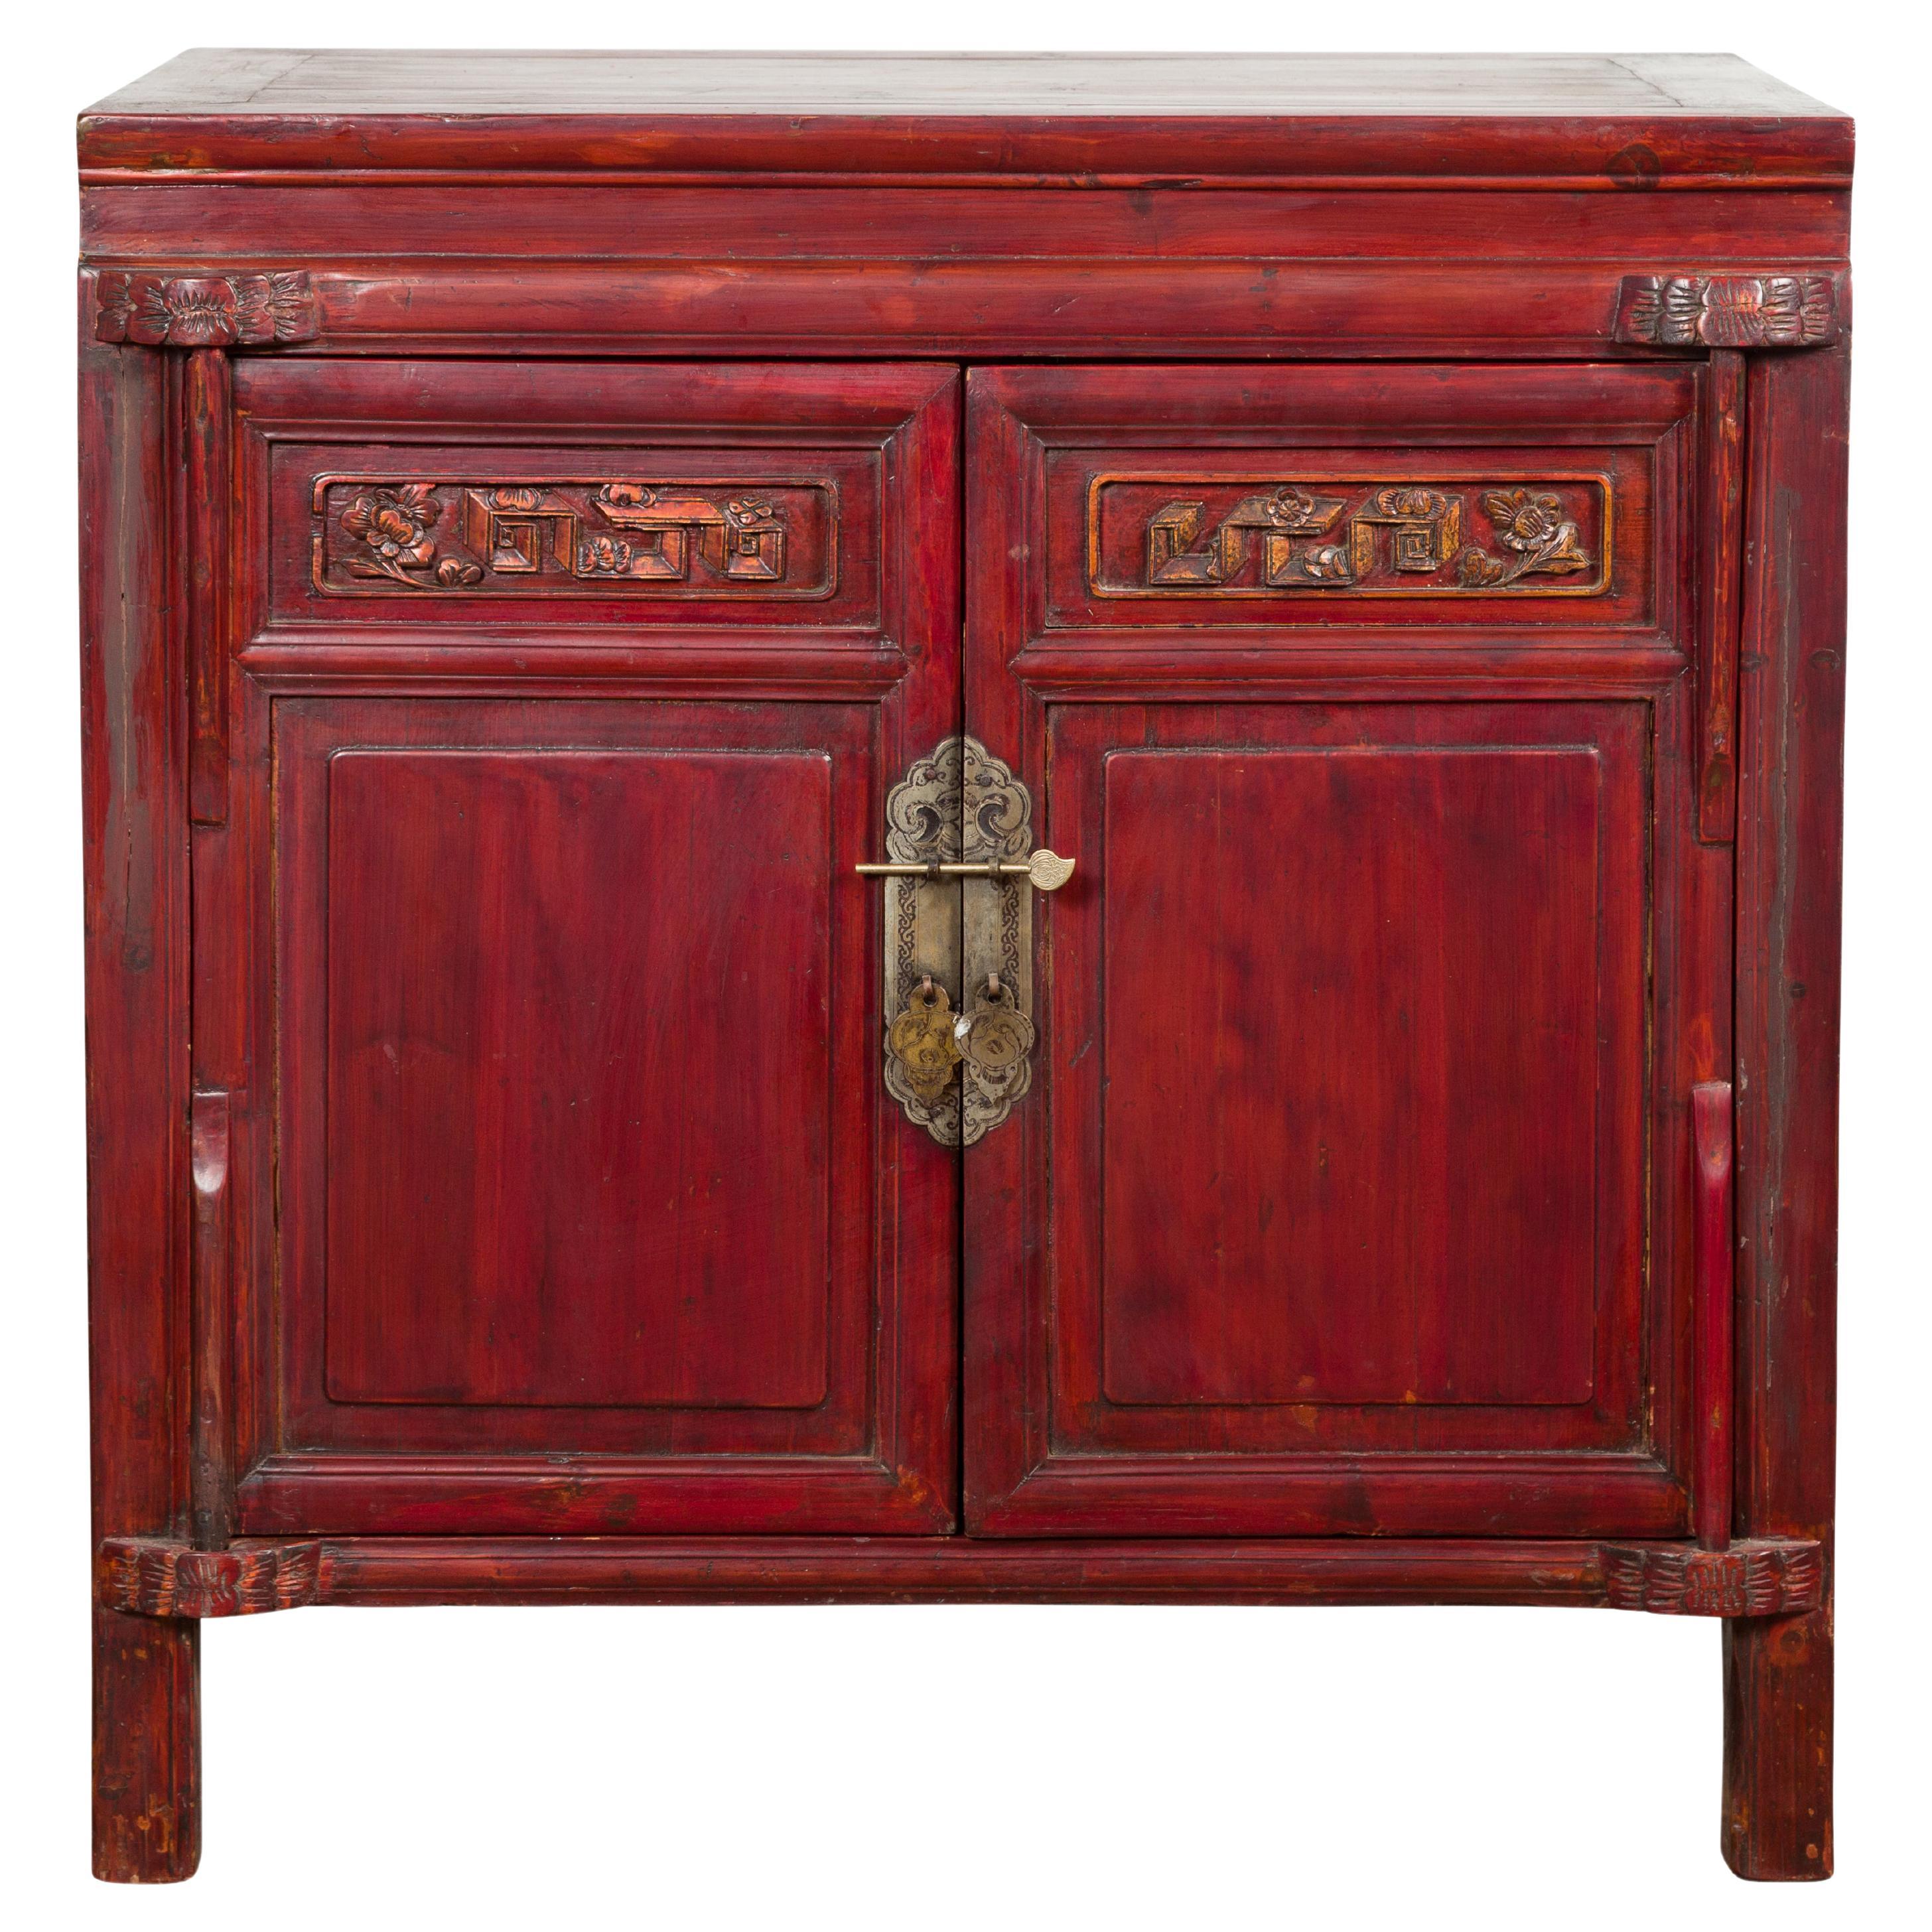 Chinese Late Qing Dynasty Red Lacquer Bedside Cabinet with Carved Décor